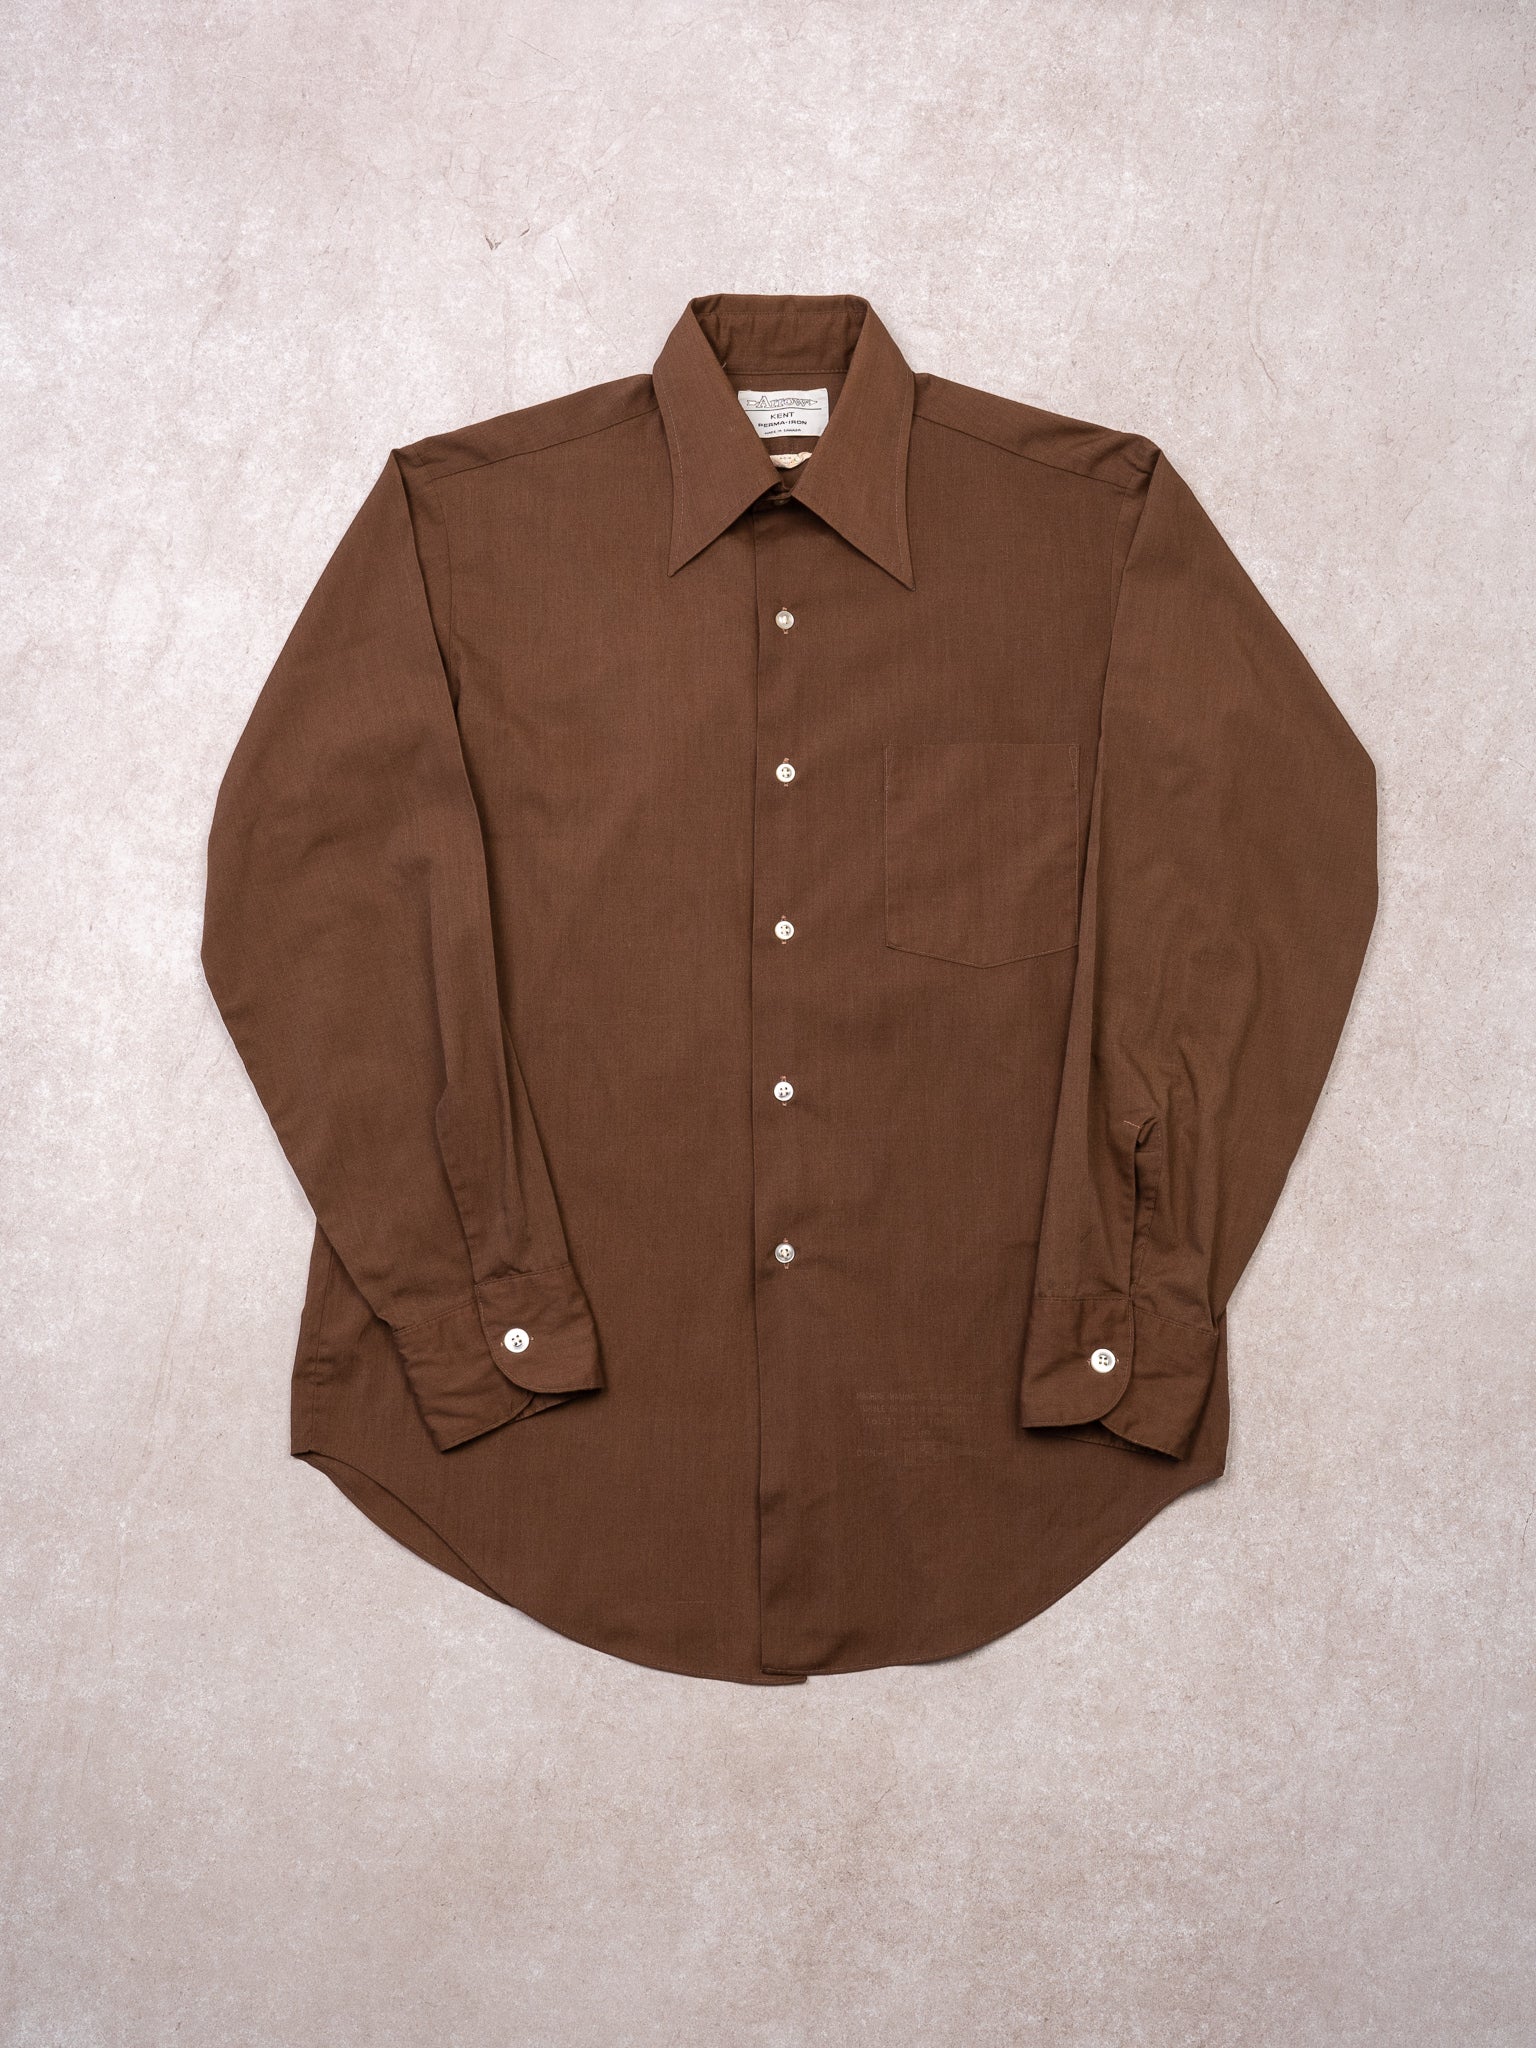 Vintage 70s Brown Arrow Long Sleeve Button Up (M)